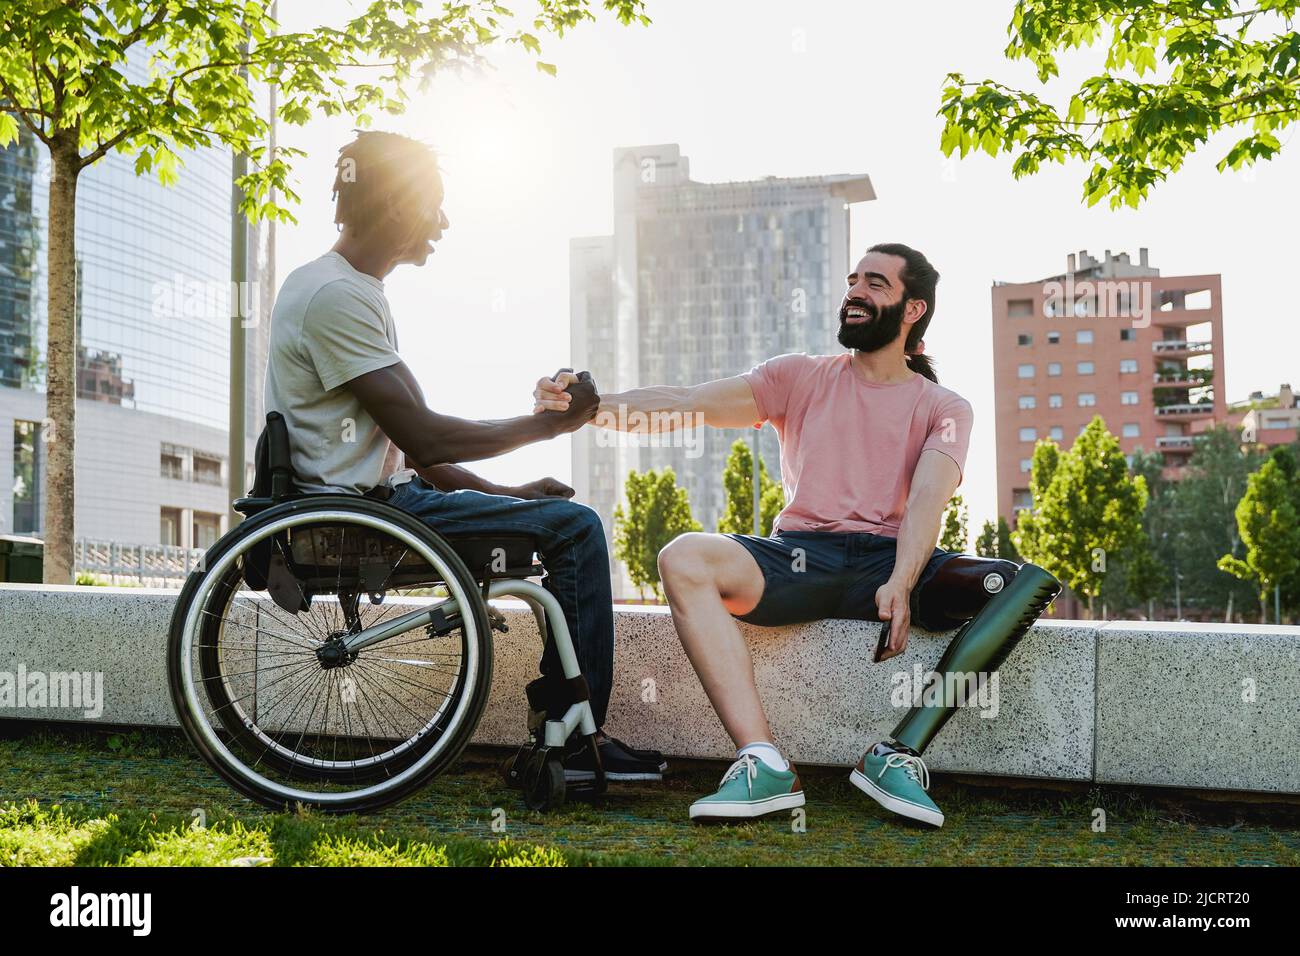 Multiethnic people with disabilities greeting each other outdoor - Focus on right man with leg prosthesis Stock Photo